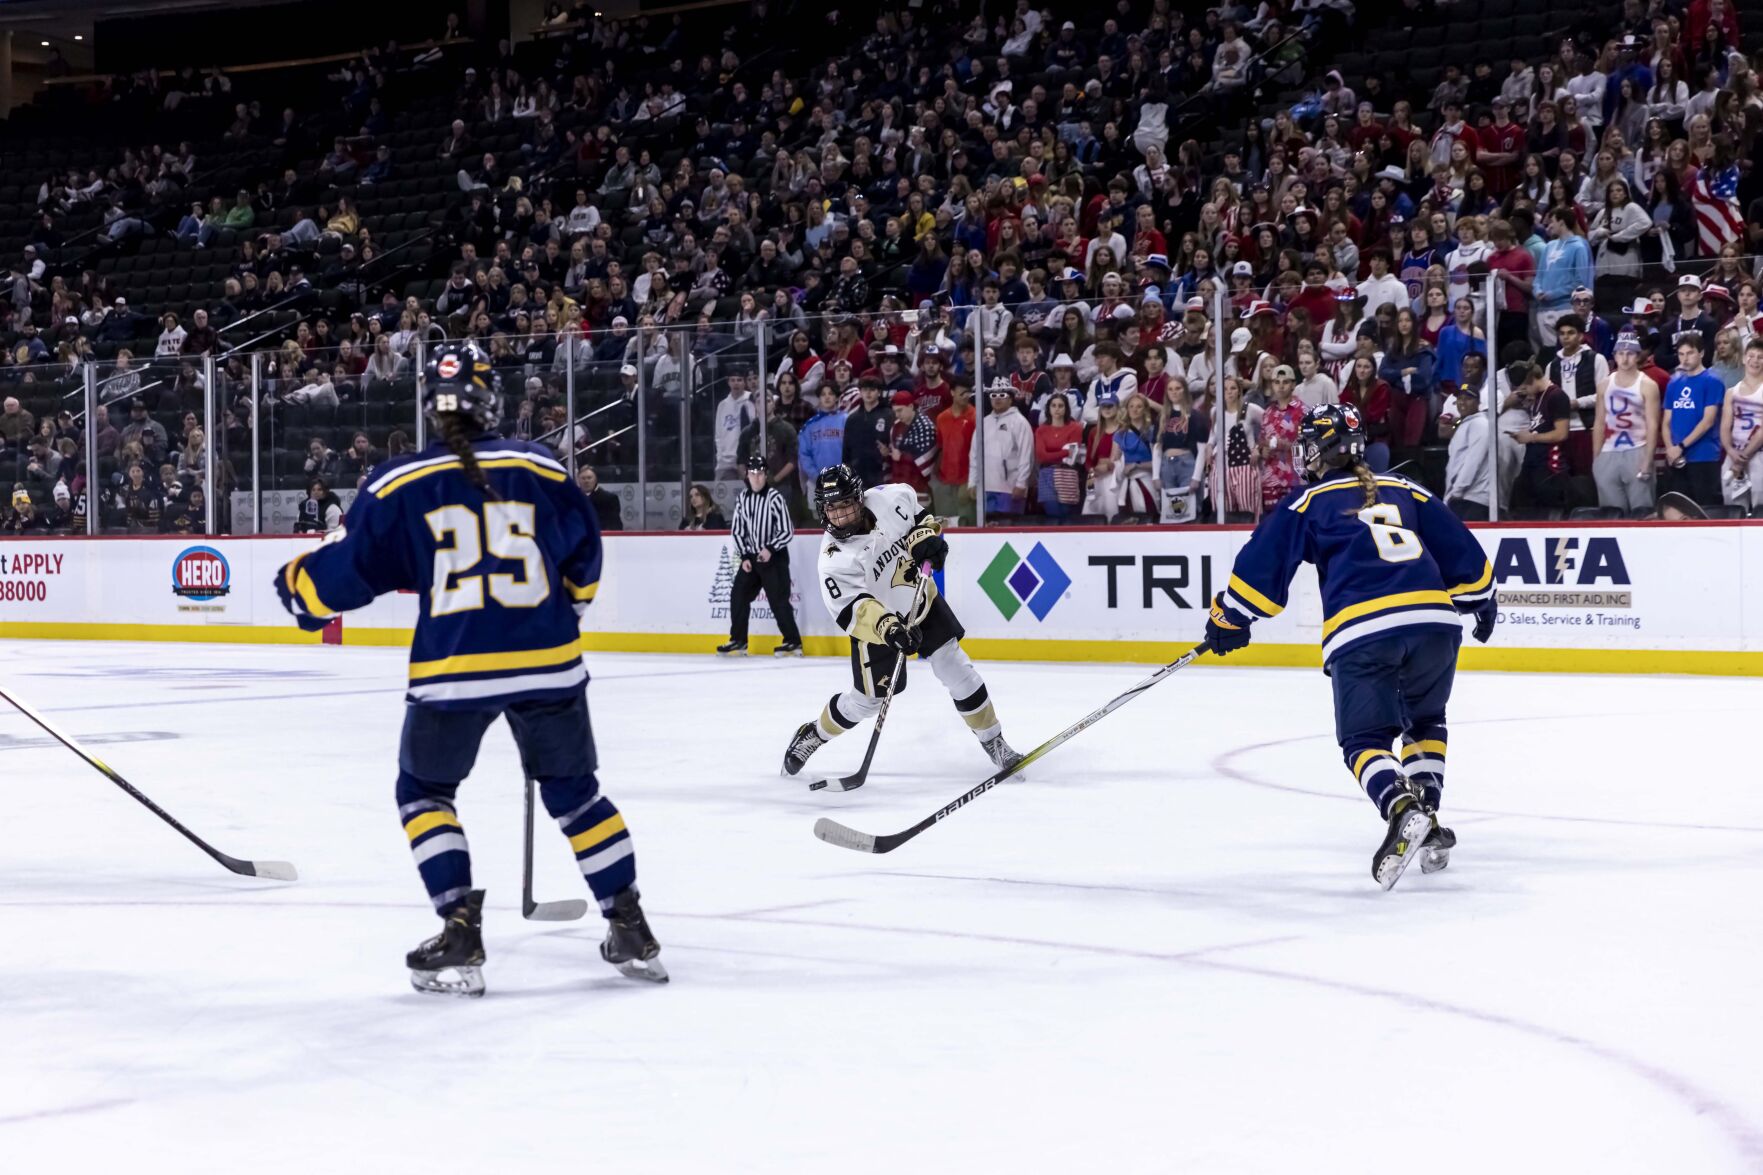 Andover’s Impressive Run: 4th Place Finish with Dominant 6-0 Shutout at State Hockey Tournament